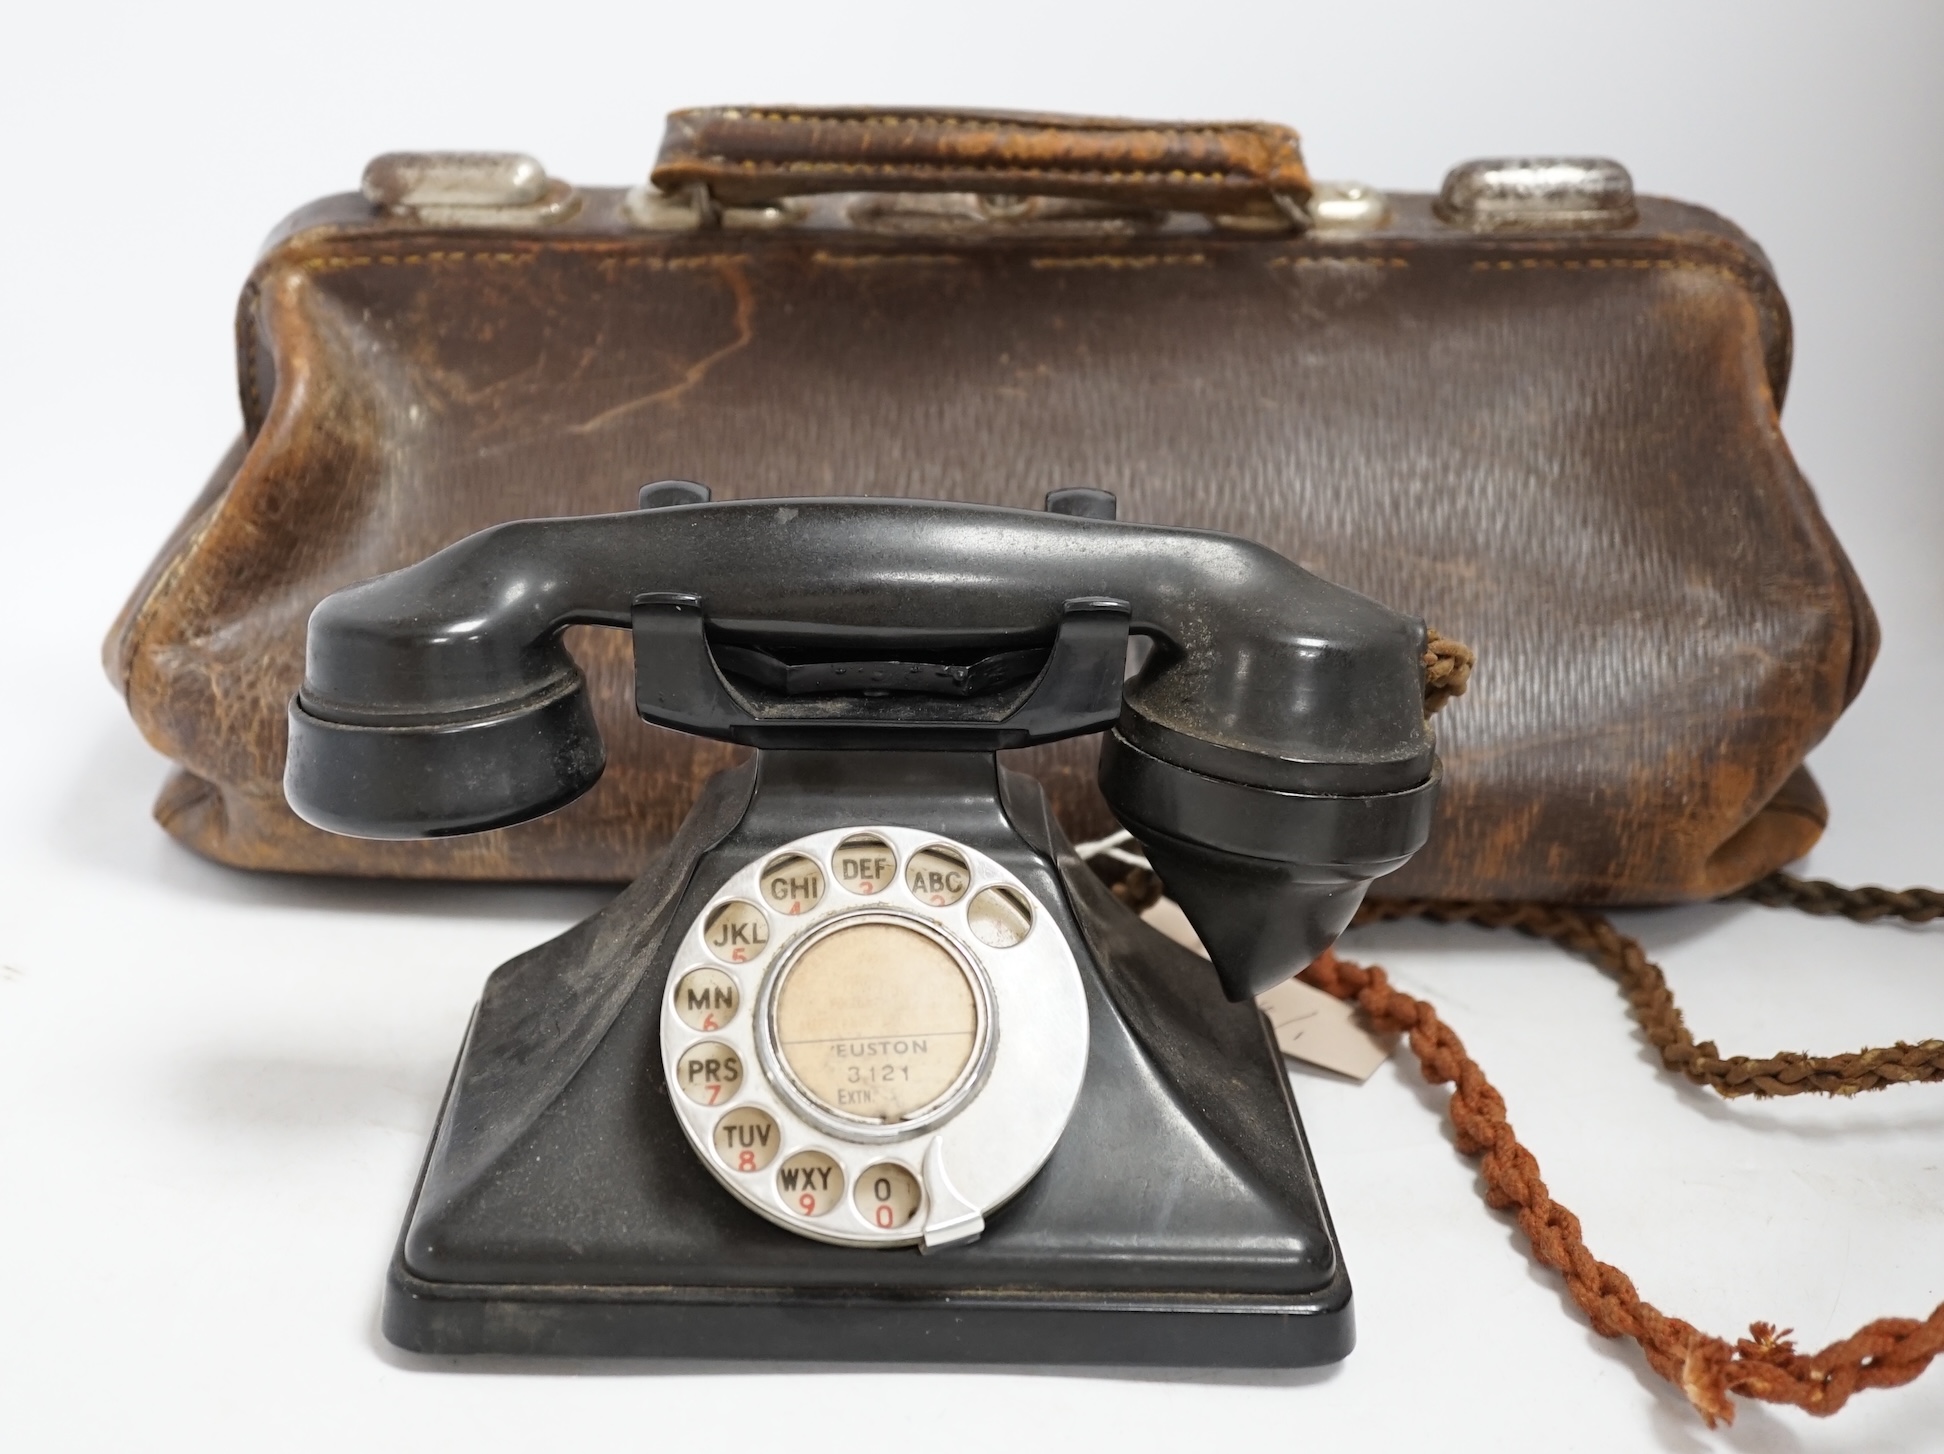 A brown leather Gladstone bag with a G.P.O. stamp and a pyramid-shaped black Bakelite telephone stamped G.P.O. Condition - poor